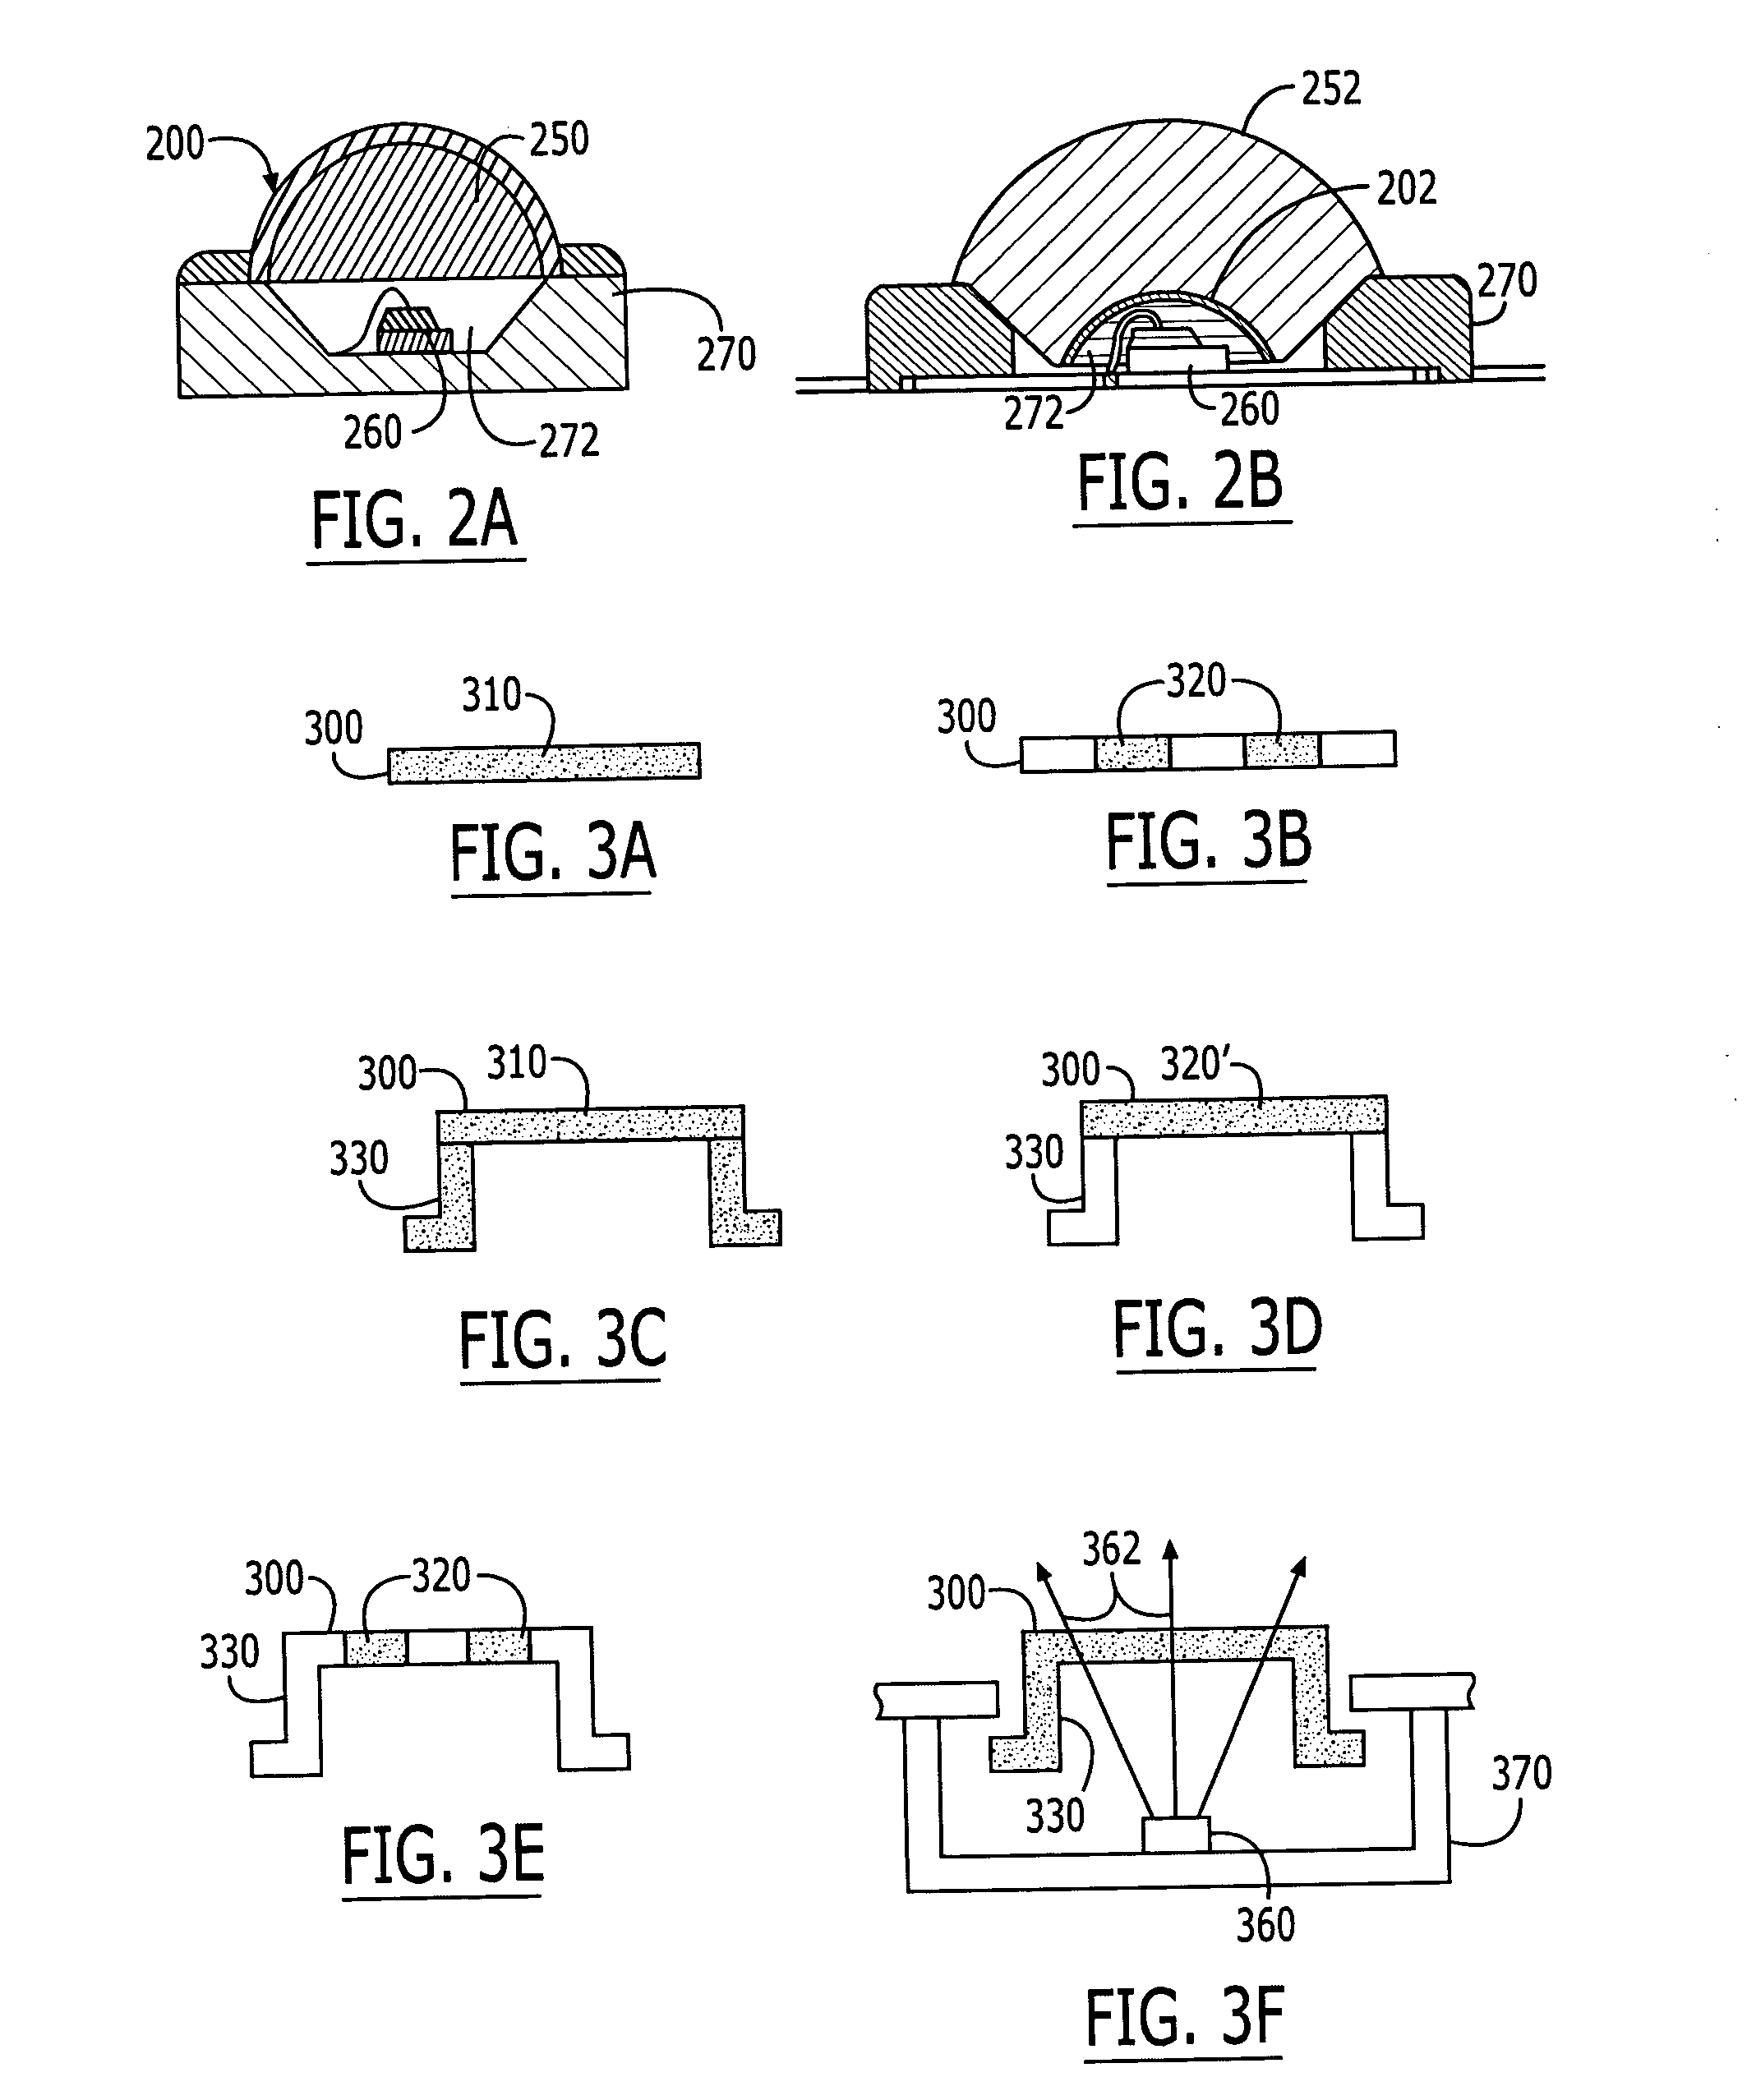 Transmissive optical elements including transparent plastic shell having a phosphor dispersed therein, and methods of fabricating same